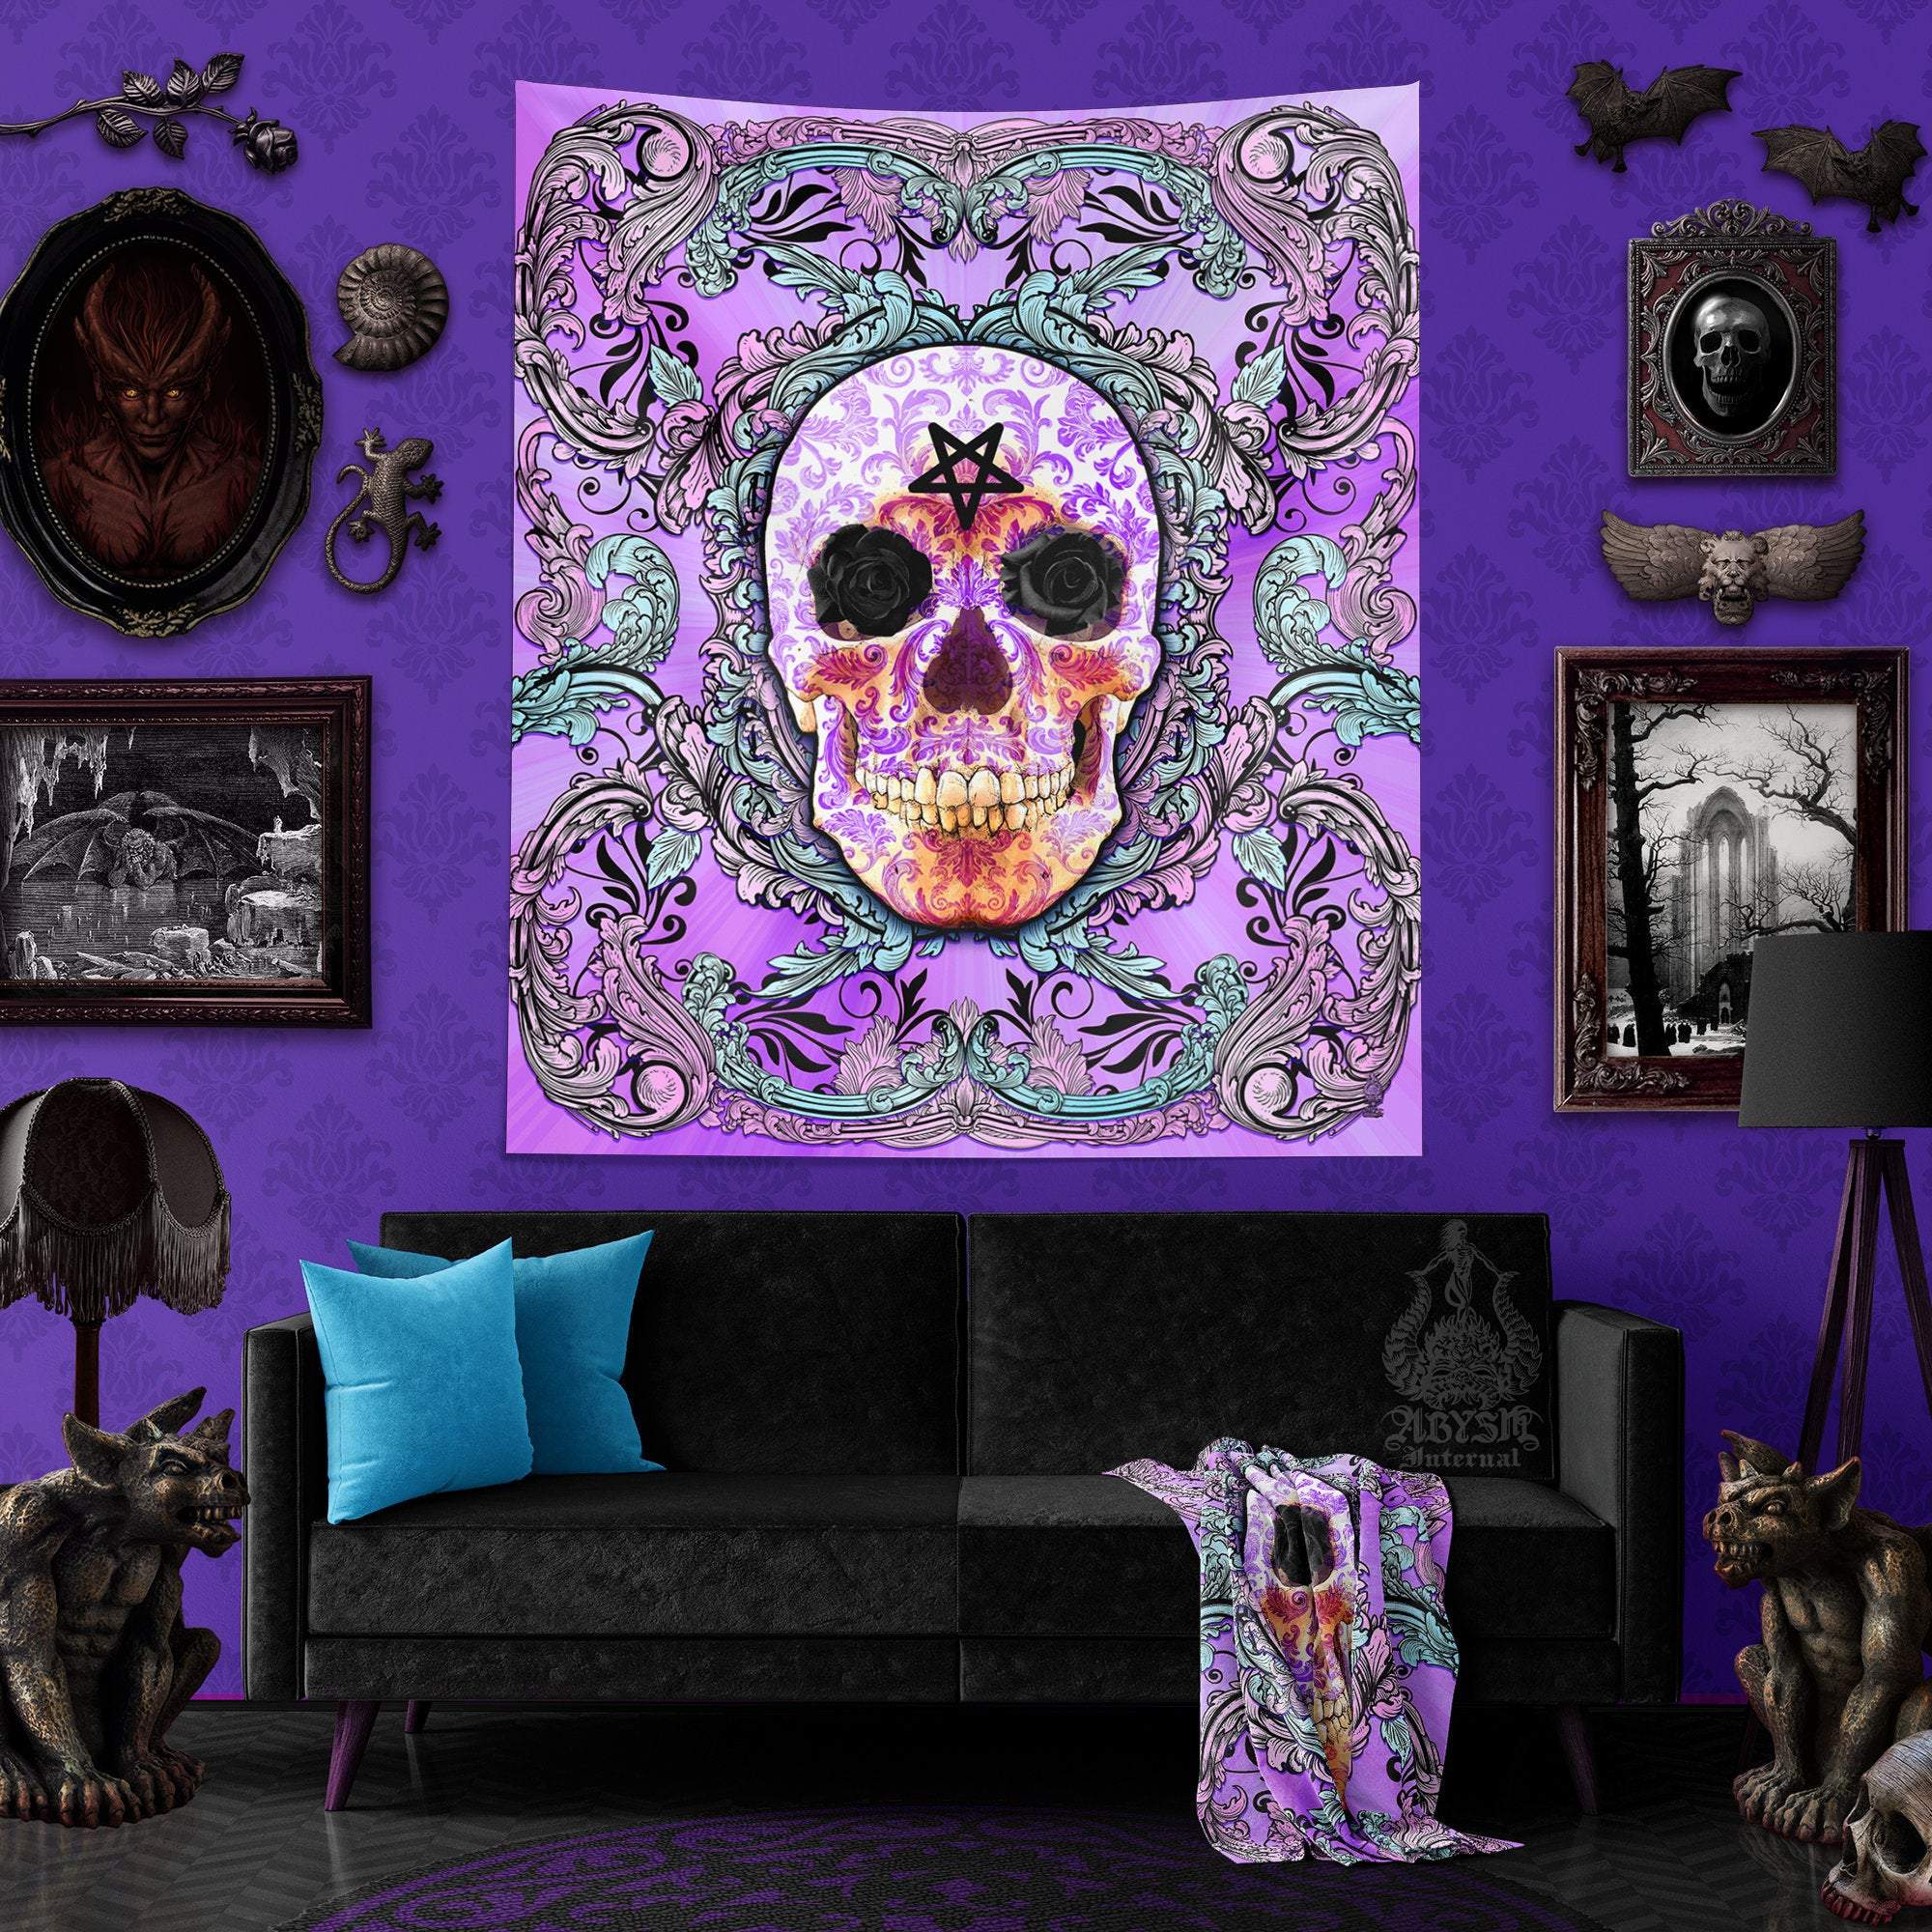 Pastel Goth Tapestry, Skull Wall Hanging, Macabre Home Decor, Art Print - Black Roses - Abysm Internal